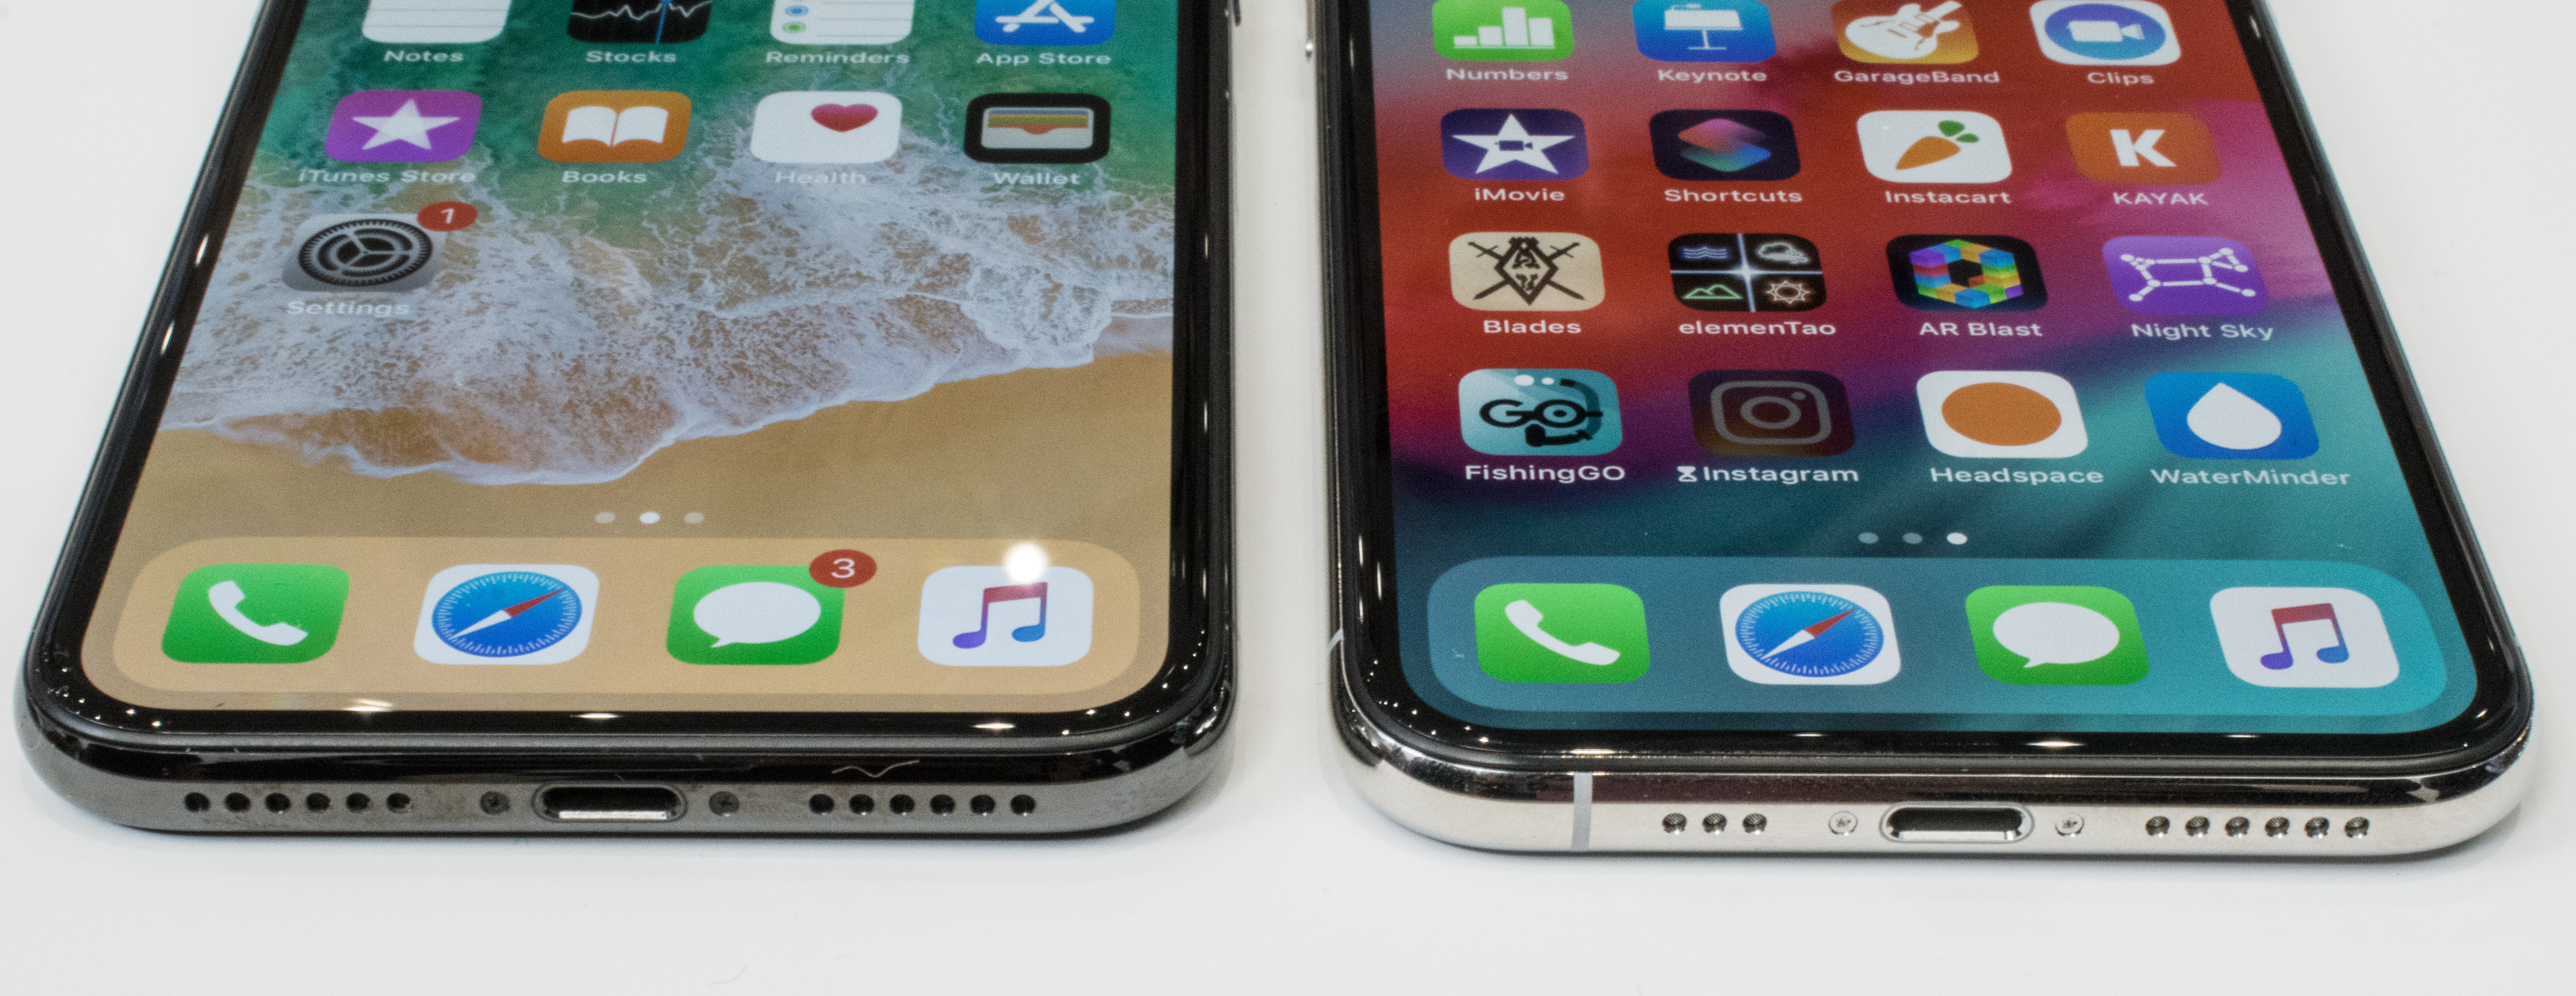 Why the iPhone X is the new iPhone you'll want now